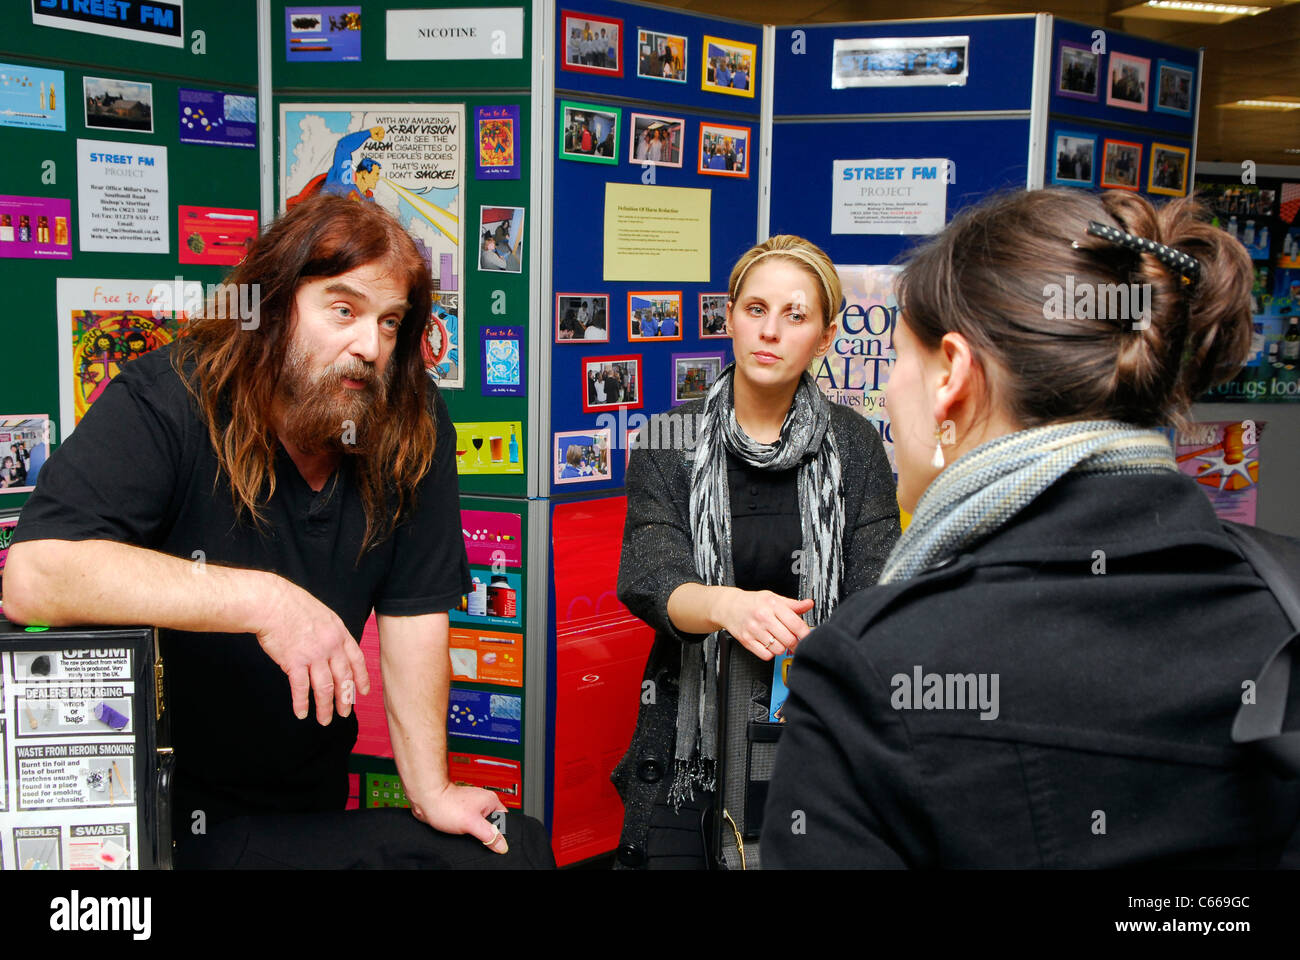 Visitor to a stall at a drug education event asking for information, Hertfordshire, UK. Stock Photo